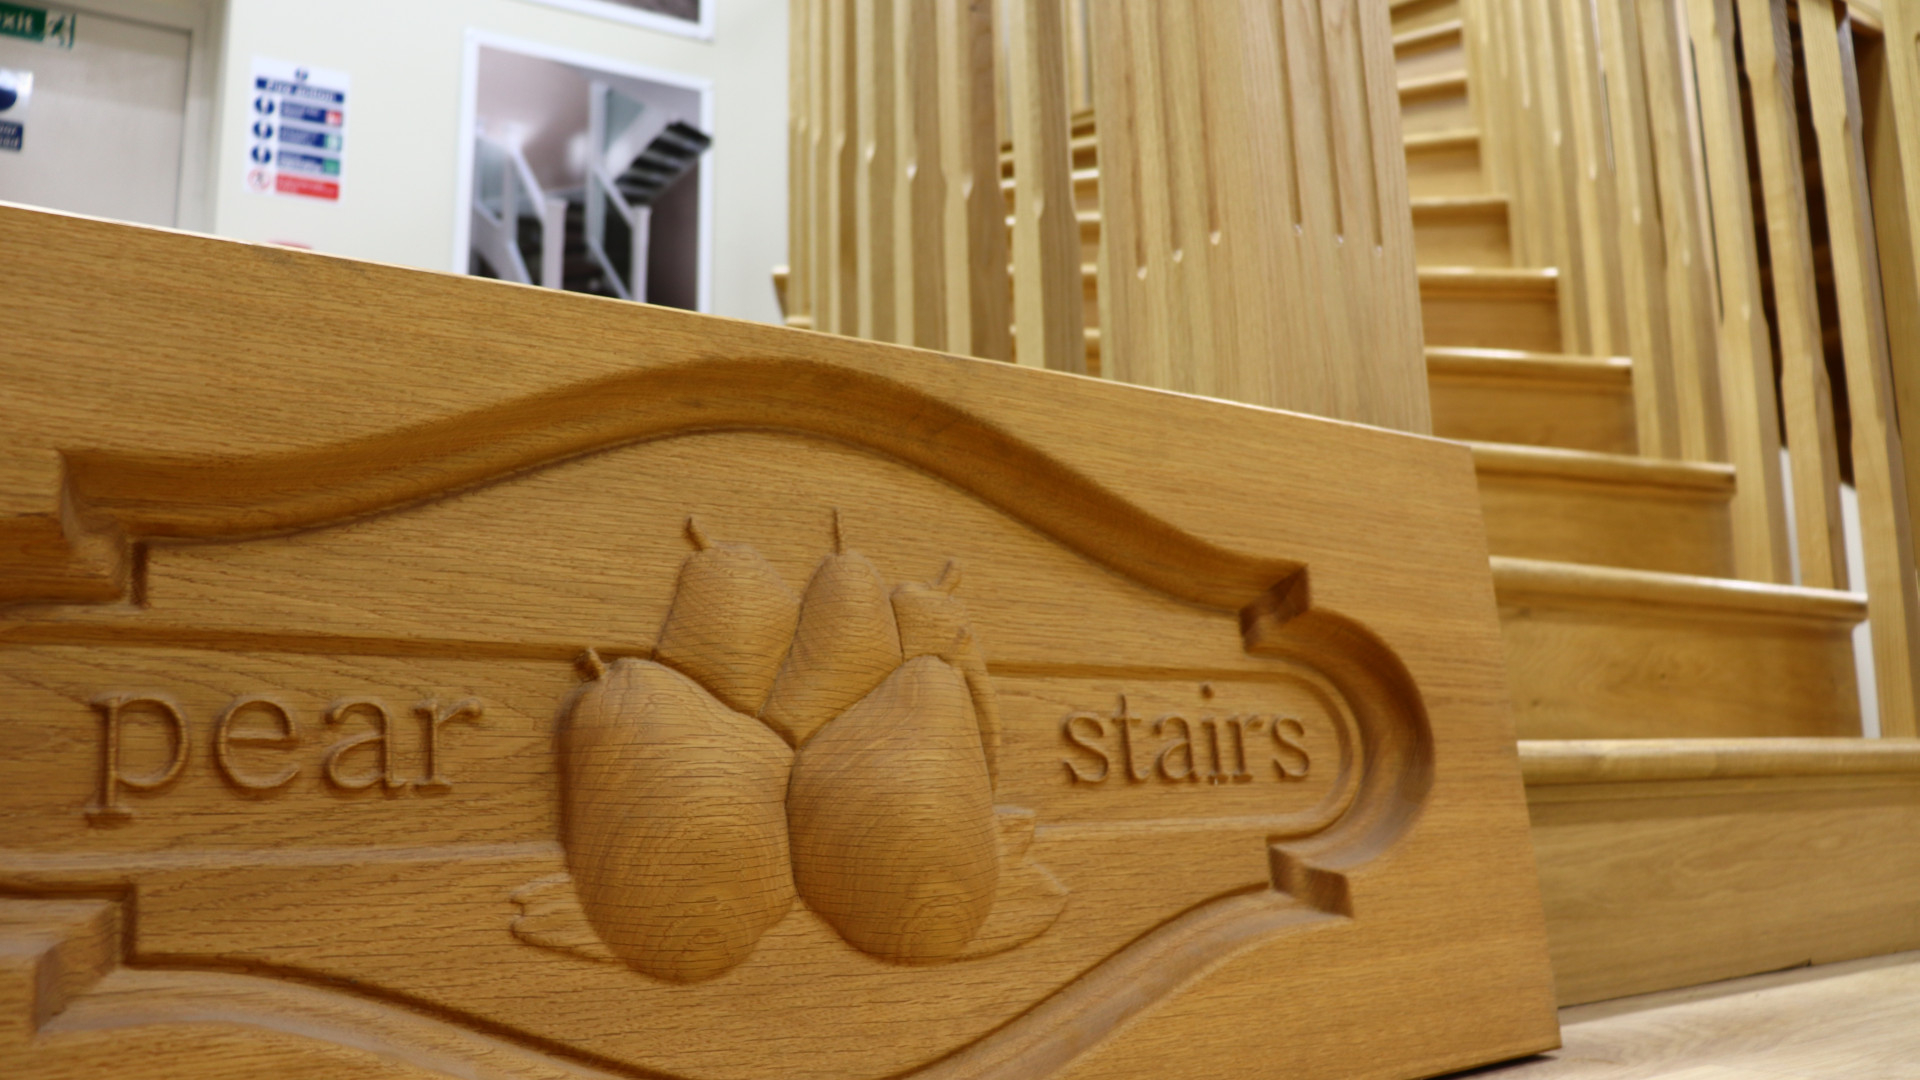 pear stairs wooden logo with wooden staircase behind it